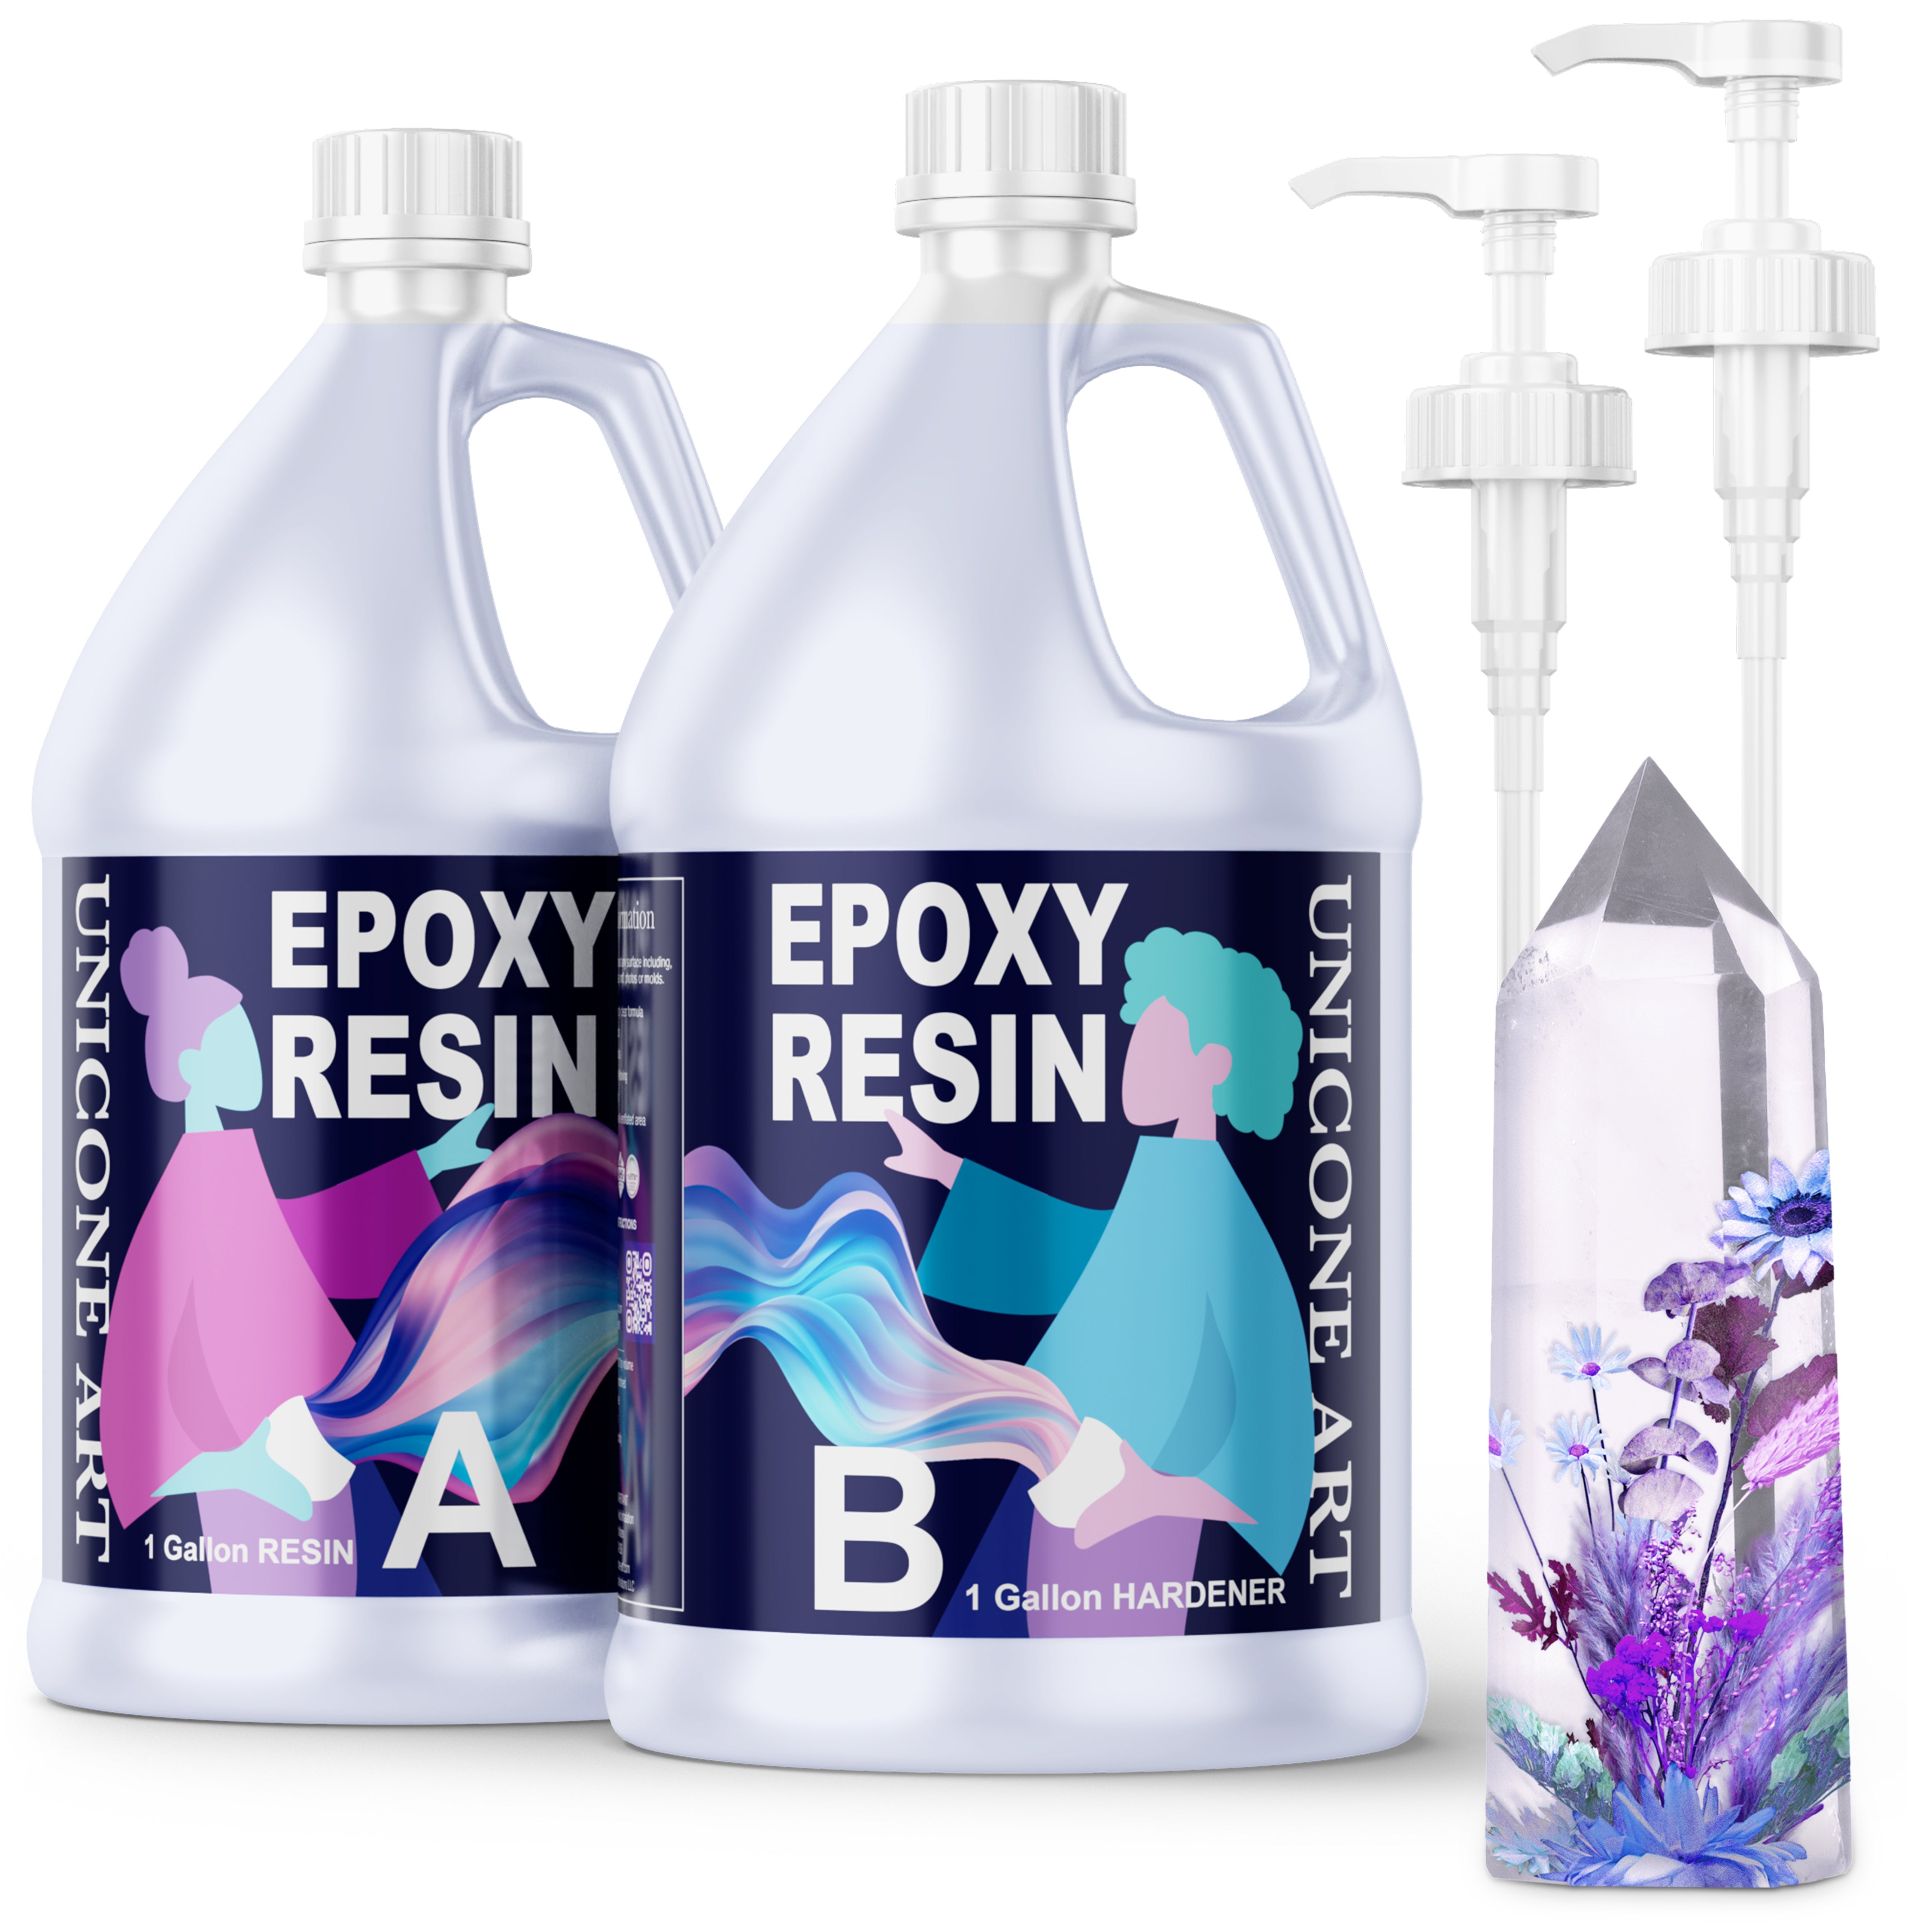 Clear Casting Epoxy Resin for Art - 2 Gallon Set with PUMPS